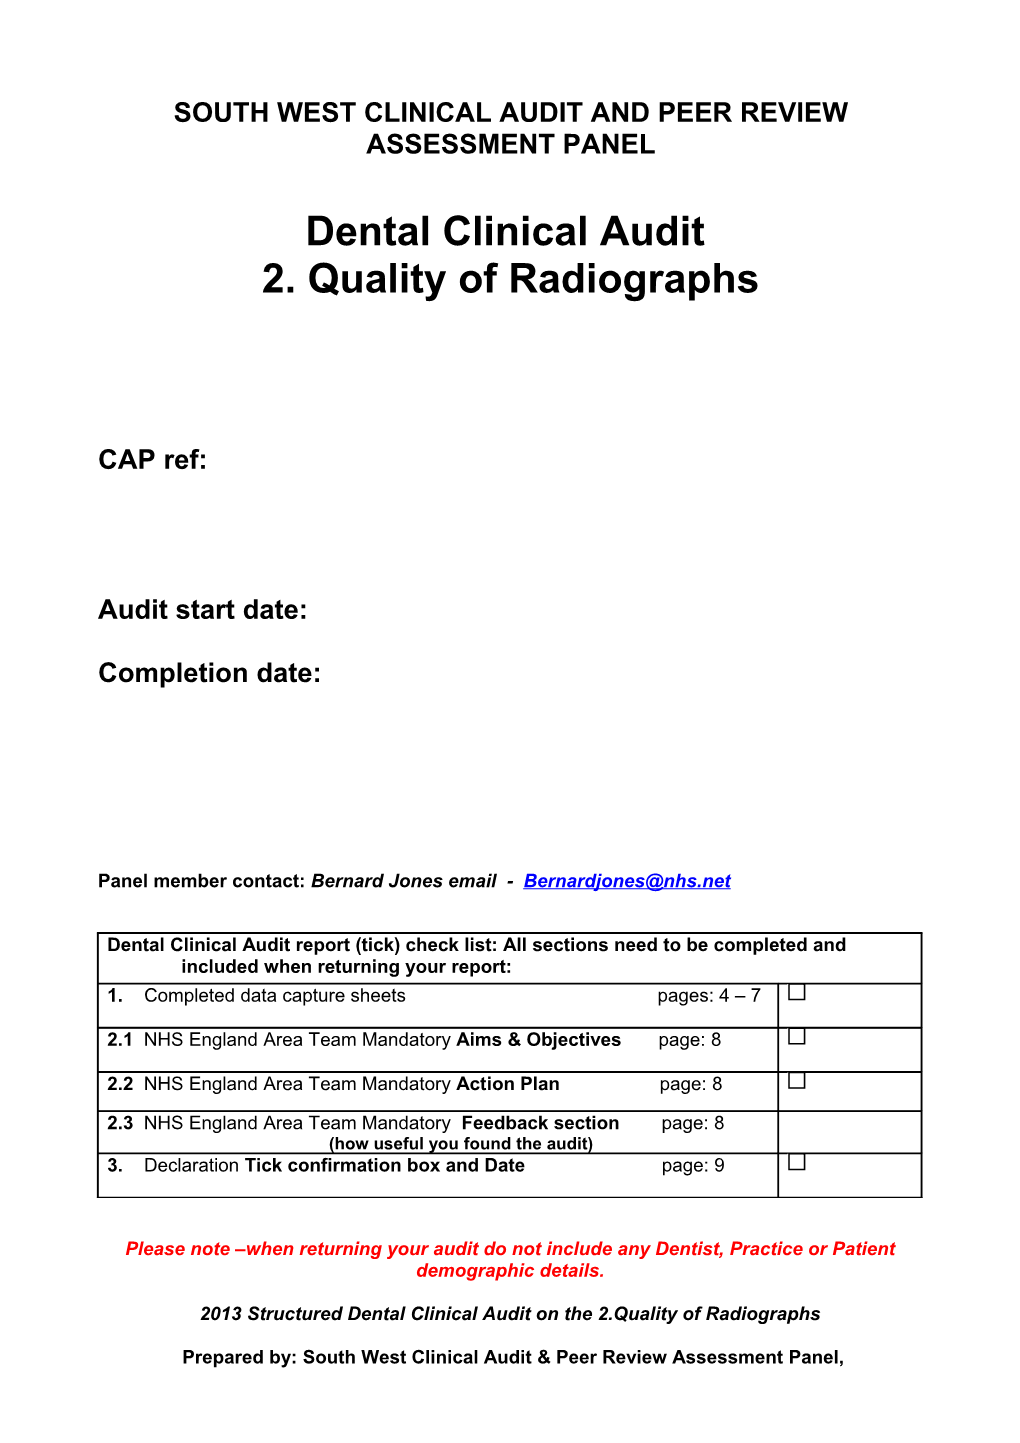 An Audit on Quality of Radiographs